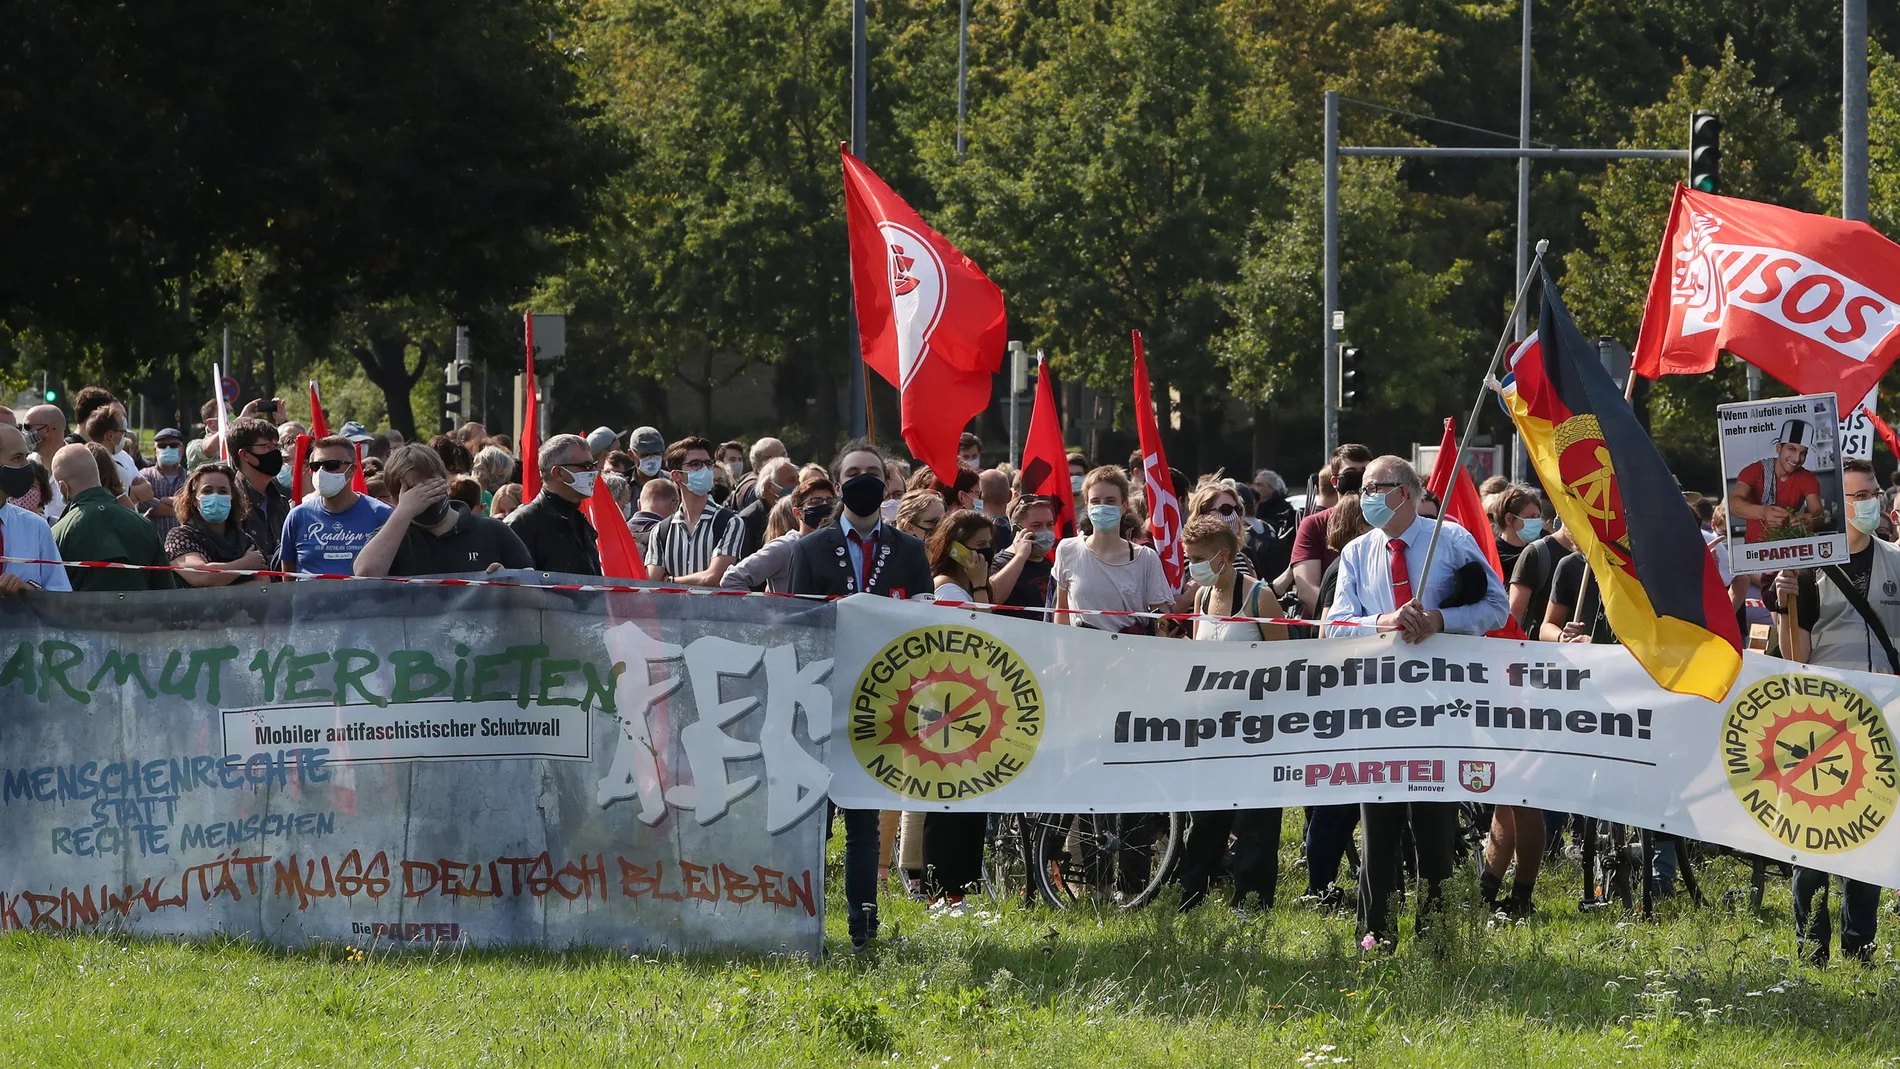 Demonstration against Corona measures in Hannover